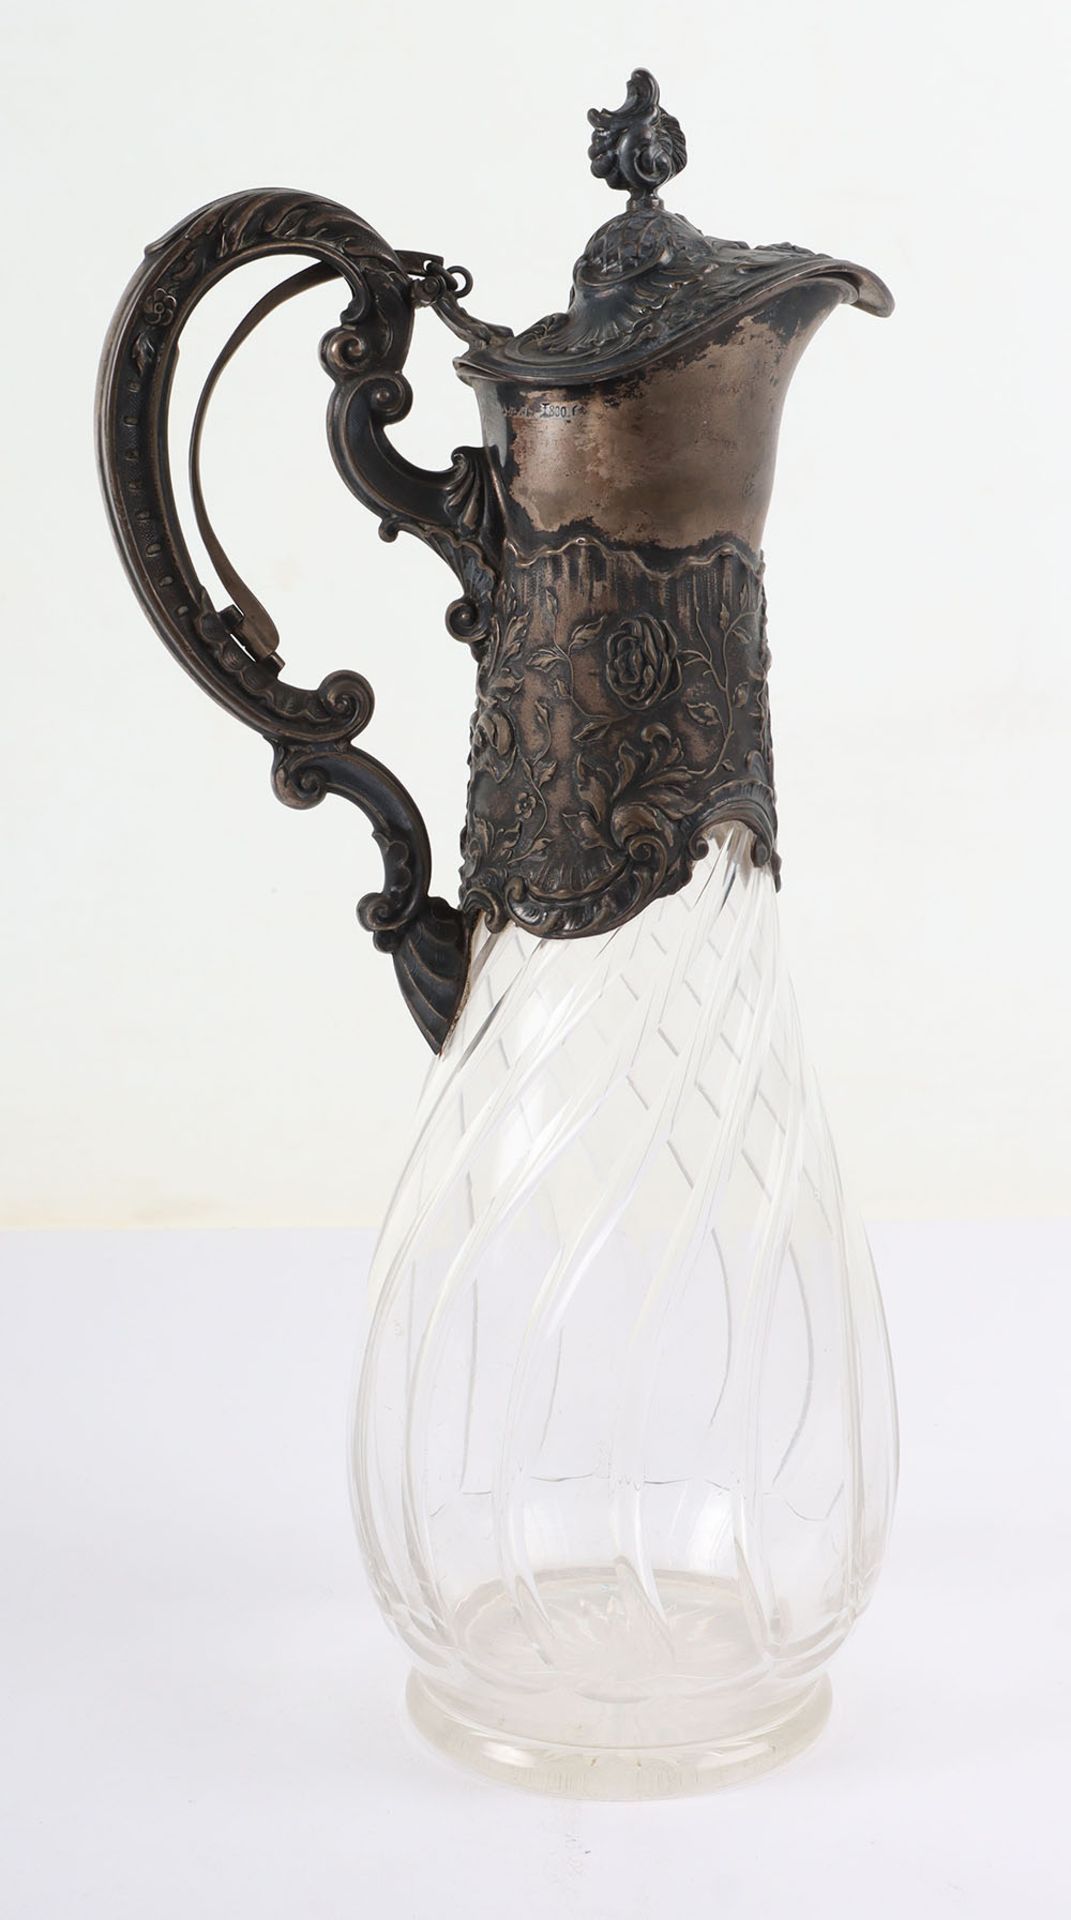 A German silver and glass claret jug